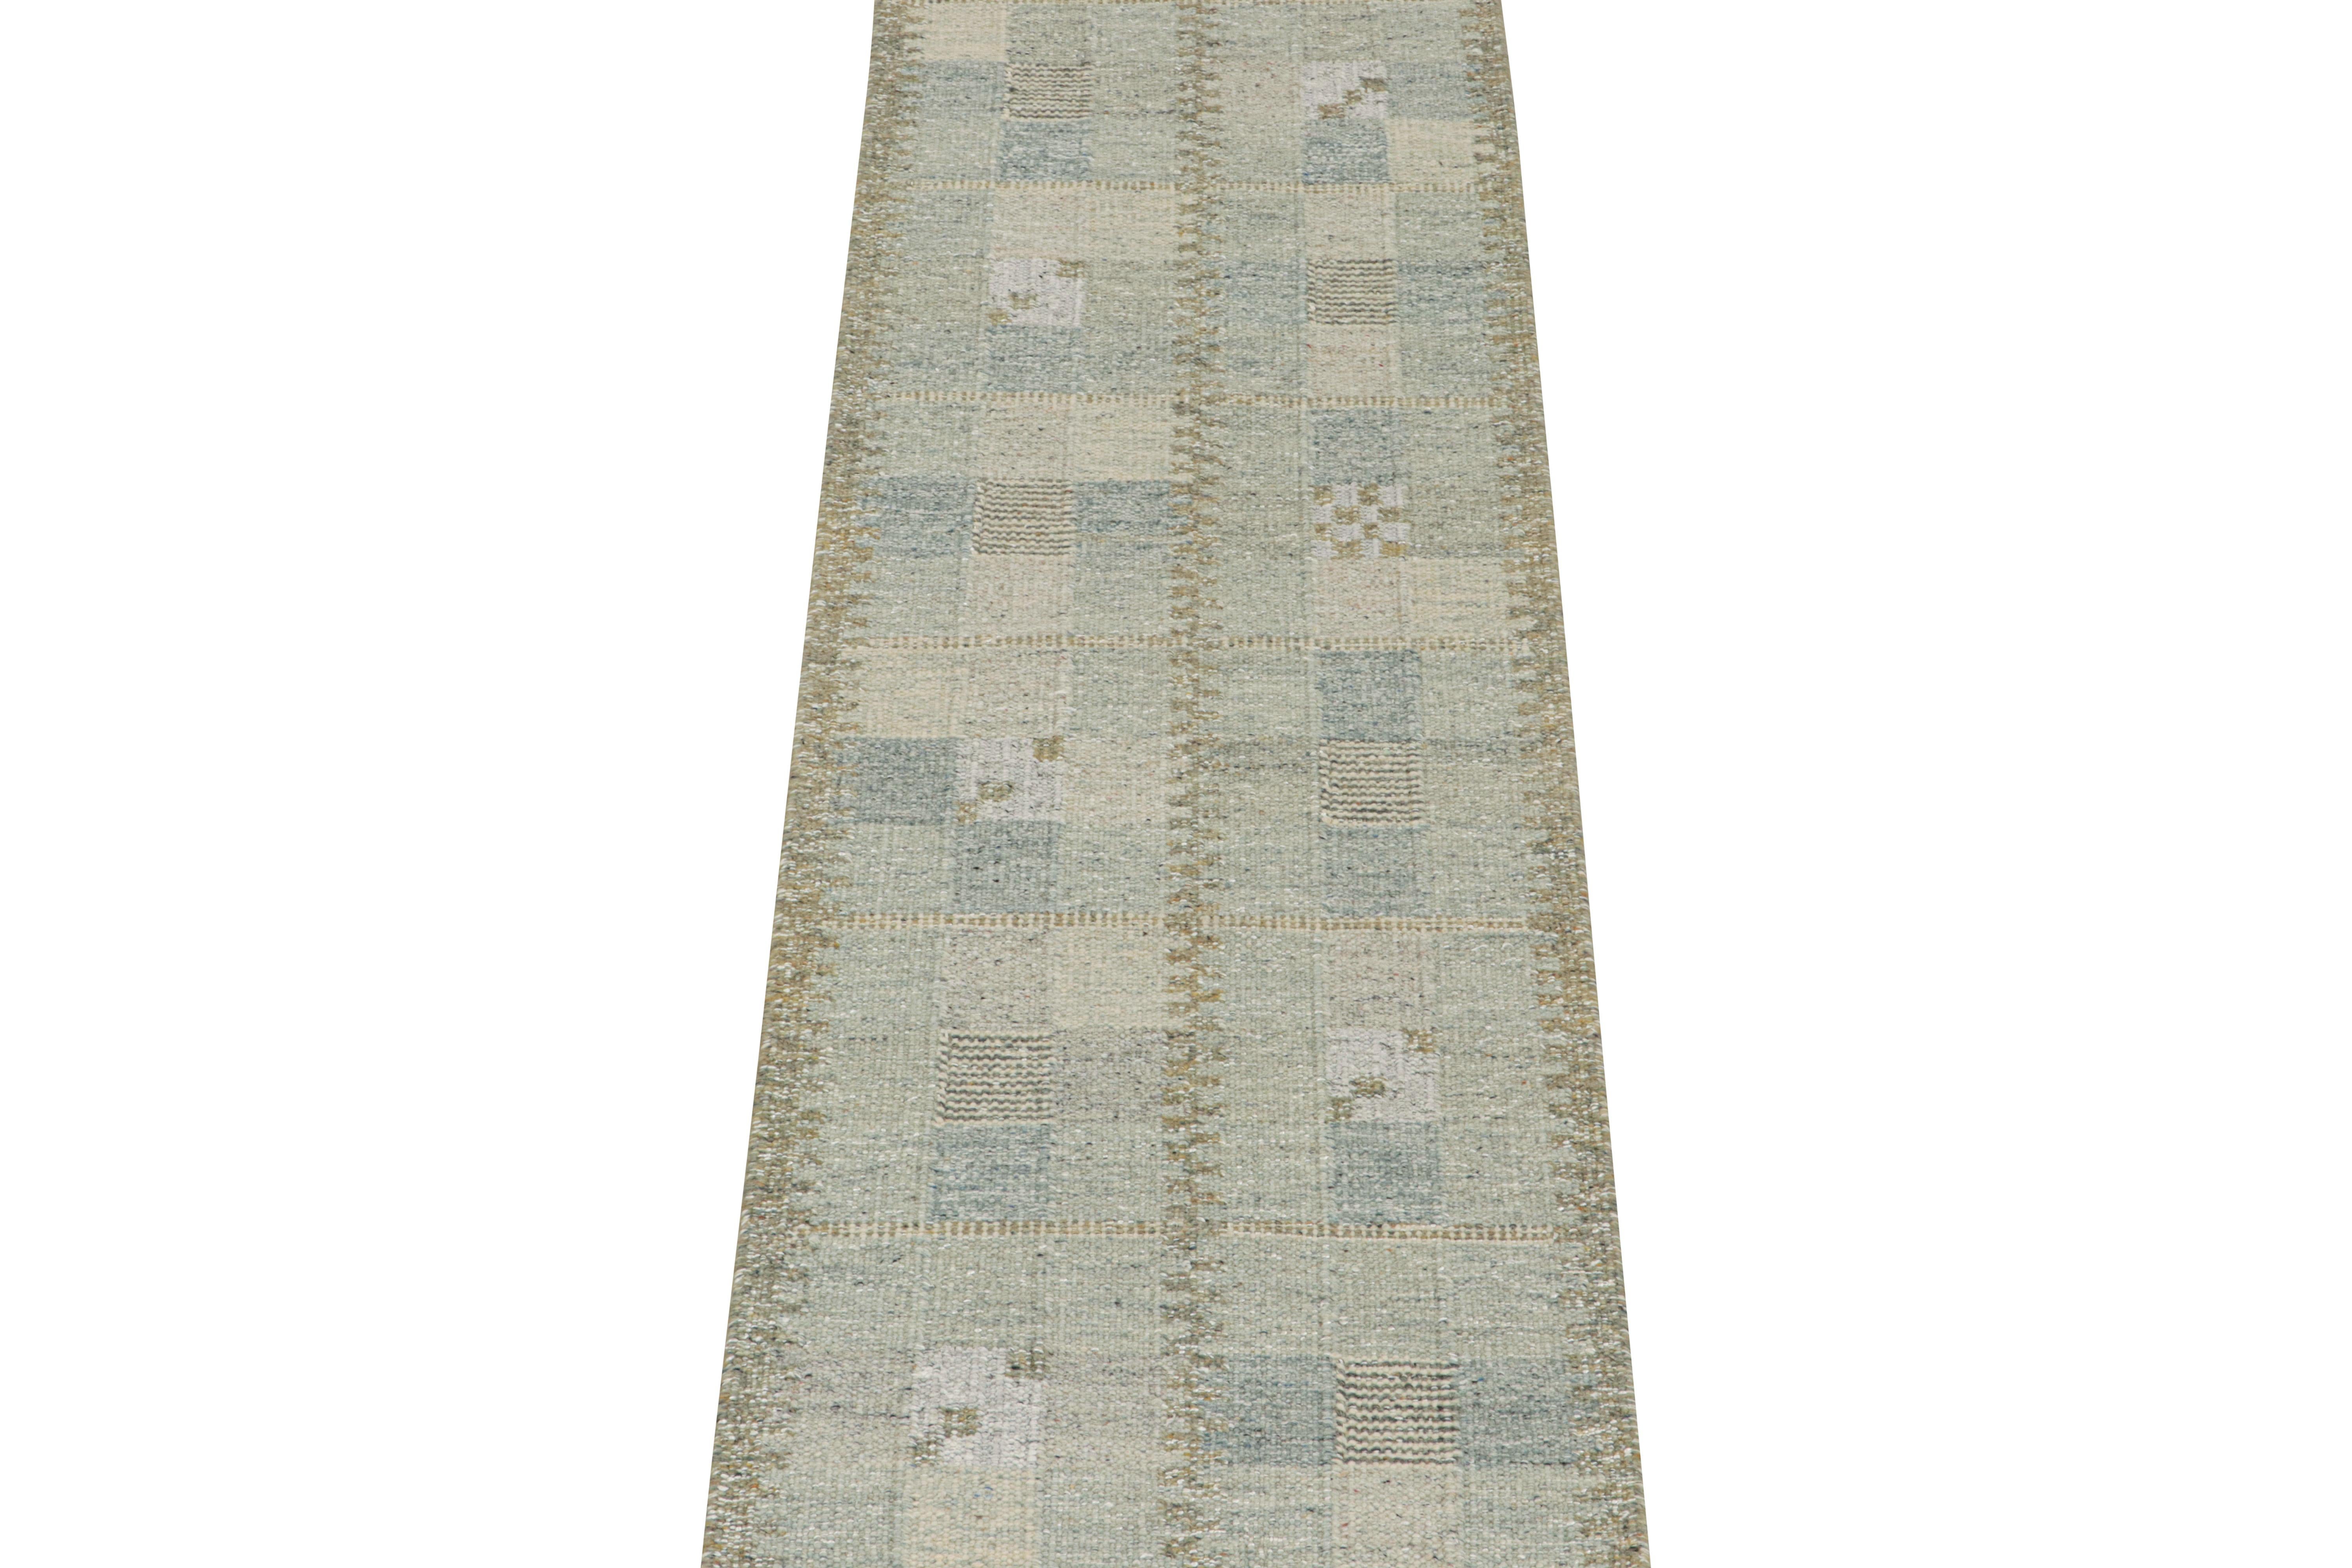 This 3x9 flat weave runner is a new addition to the Scandinavian Kilim collection by Rug & Kilim. Handwoven in wool and natural yarns, its design reflects a contemporary take on mid-century Rollakans and Swedish Deco style.

On the Design:

This